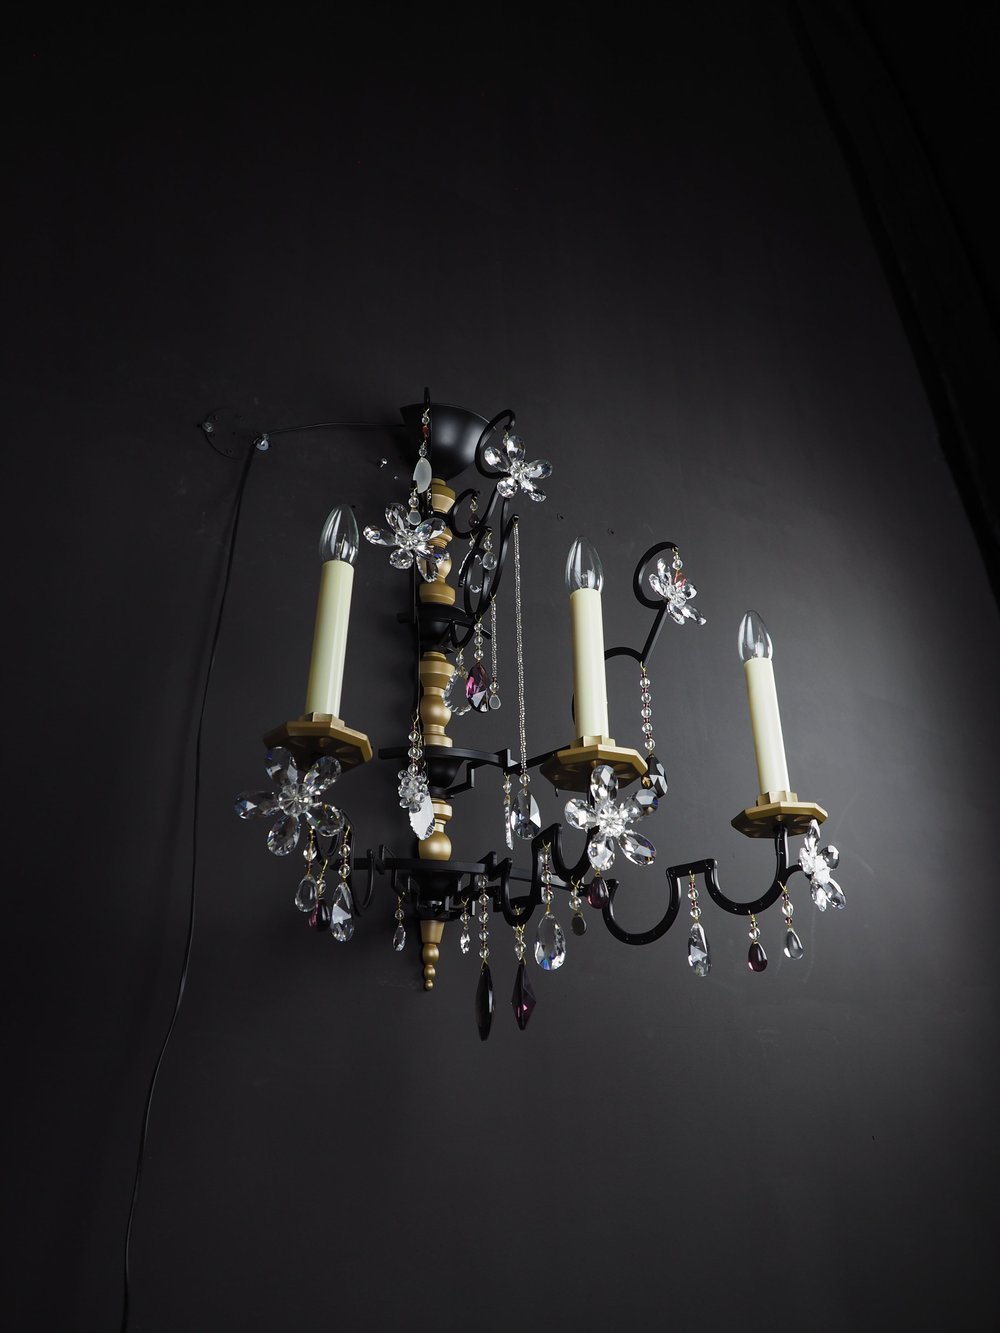 Chanel stores — WRANOVSKY - Bohemian Crystal Chandeliers Manufacturer